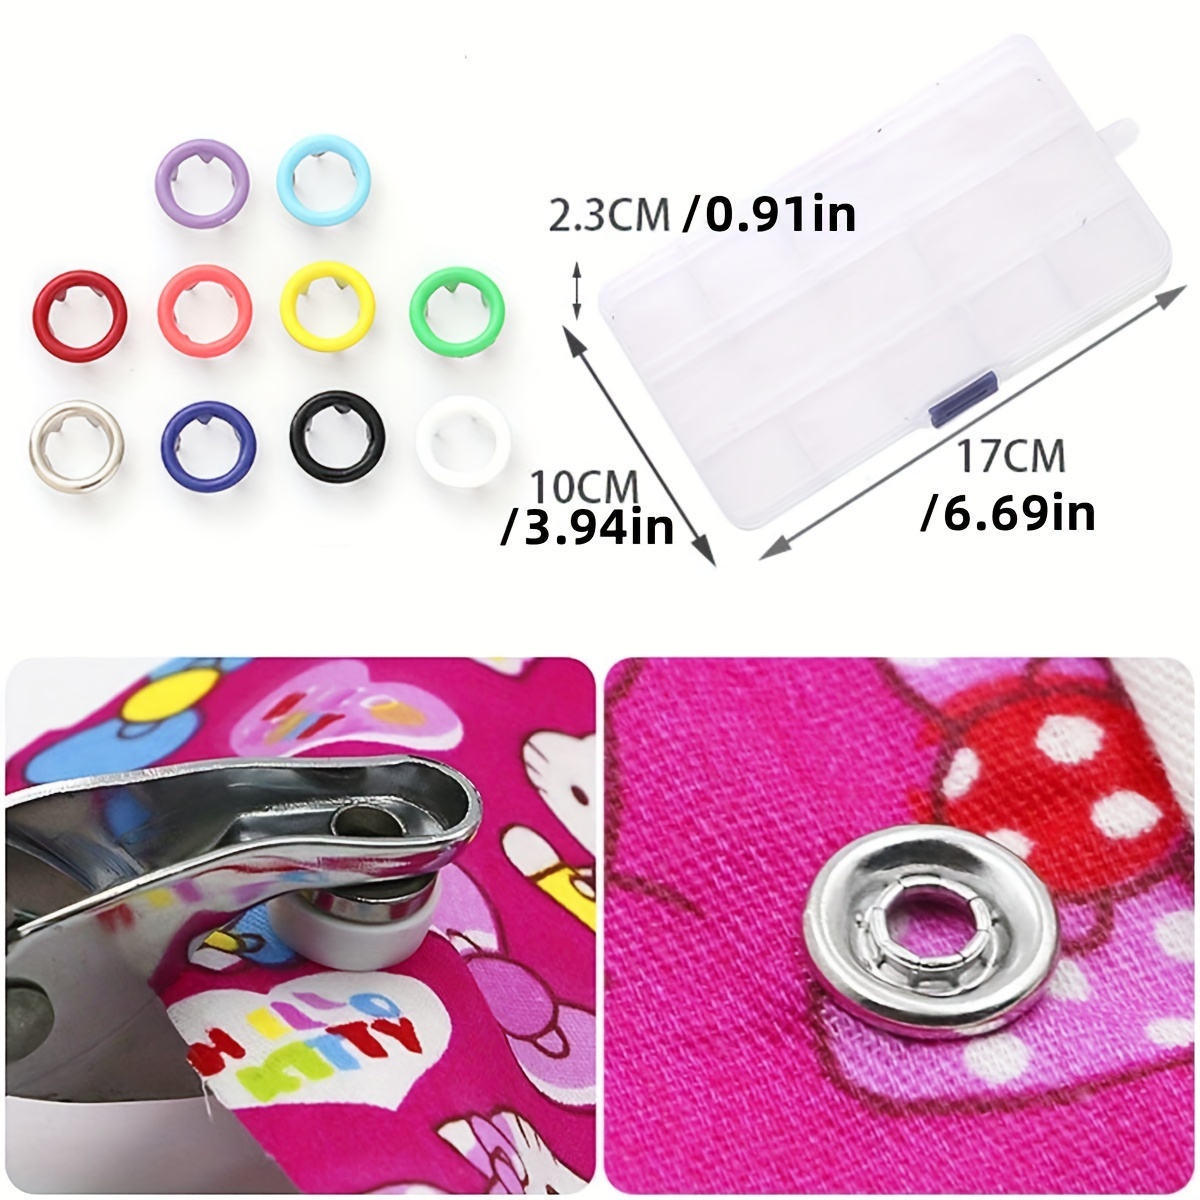 15mm Silver Back Snap Press Studs, Multicoloured Press Studs 4 Parts Snap  Fasteners Metal Snaps for Leather Craft, Jackets, Sewing, Purse 